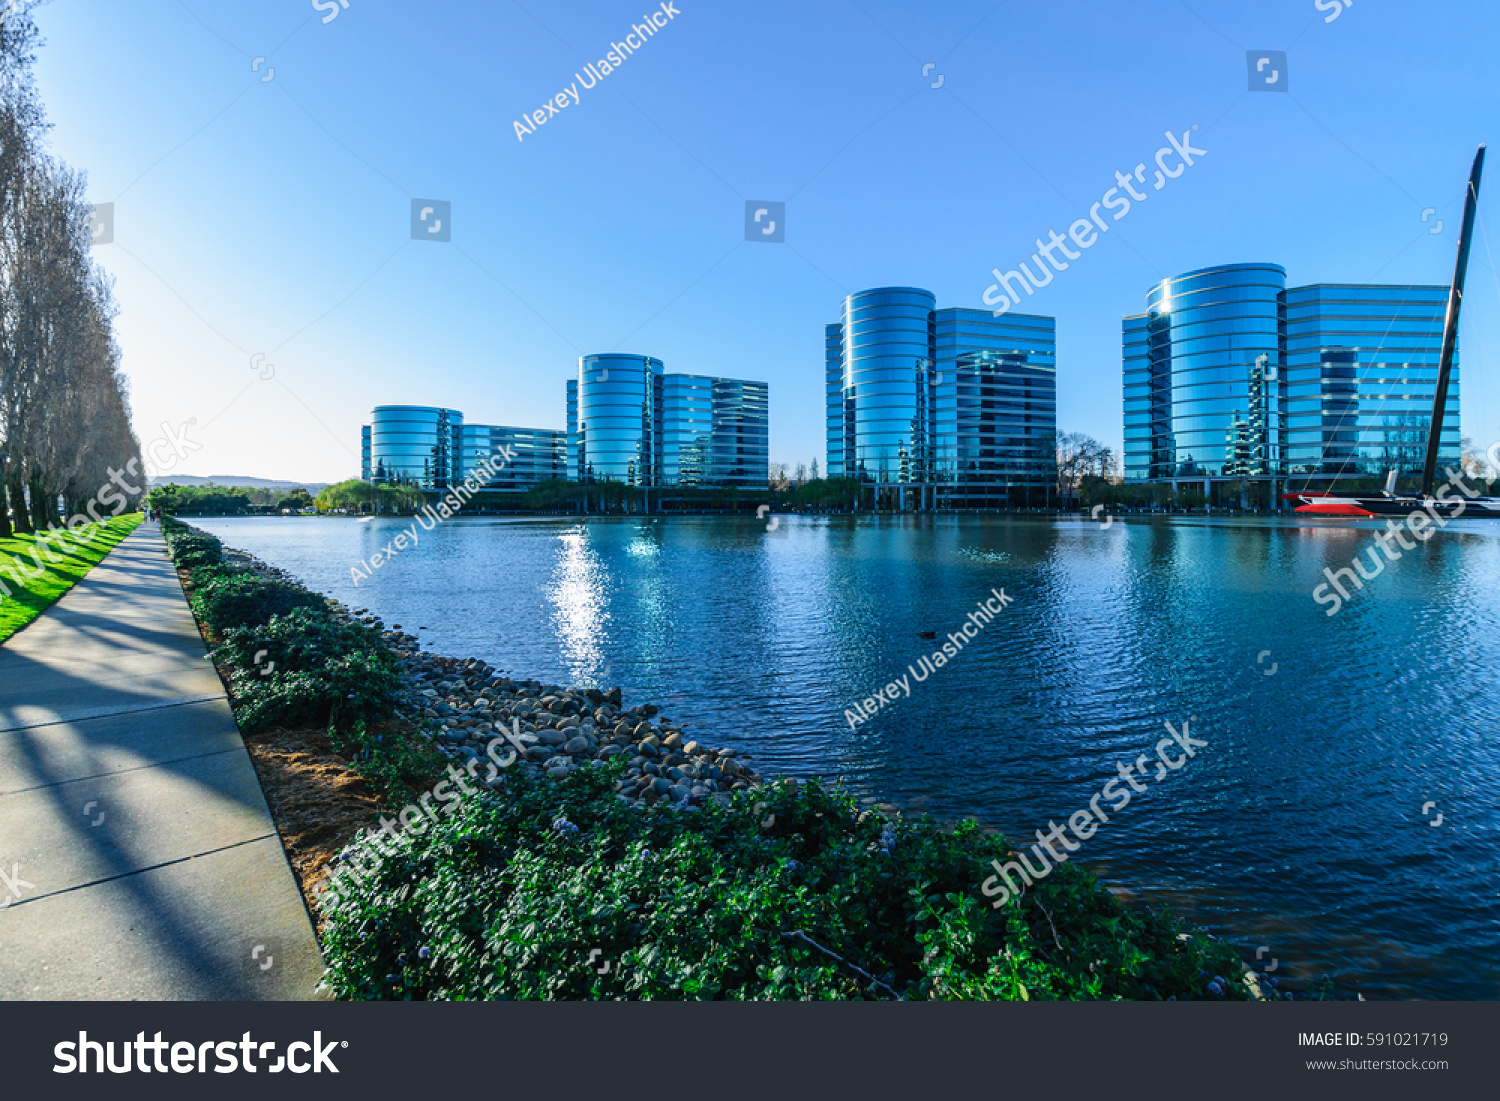 Modern Business Architecture. Silicon Valley, Redwood City, California, United States.
 #591021719